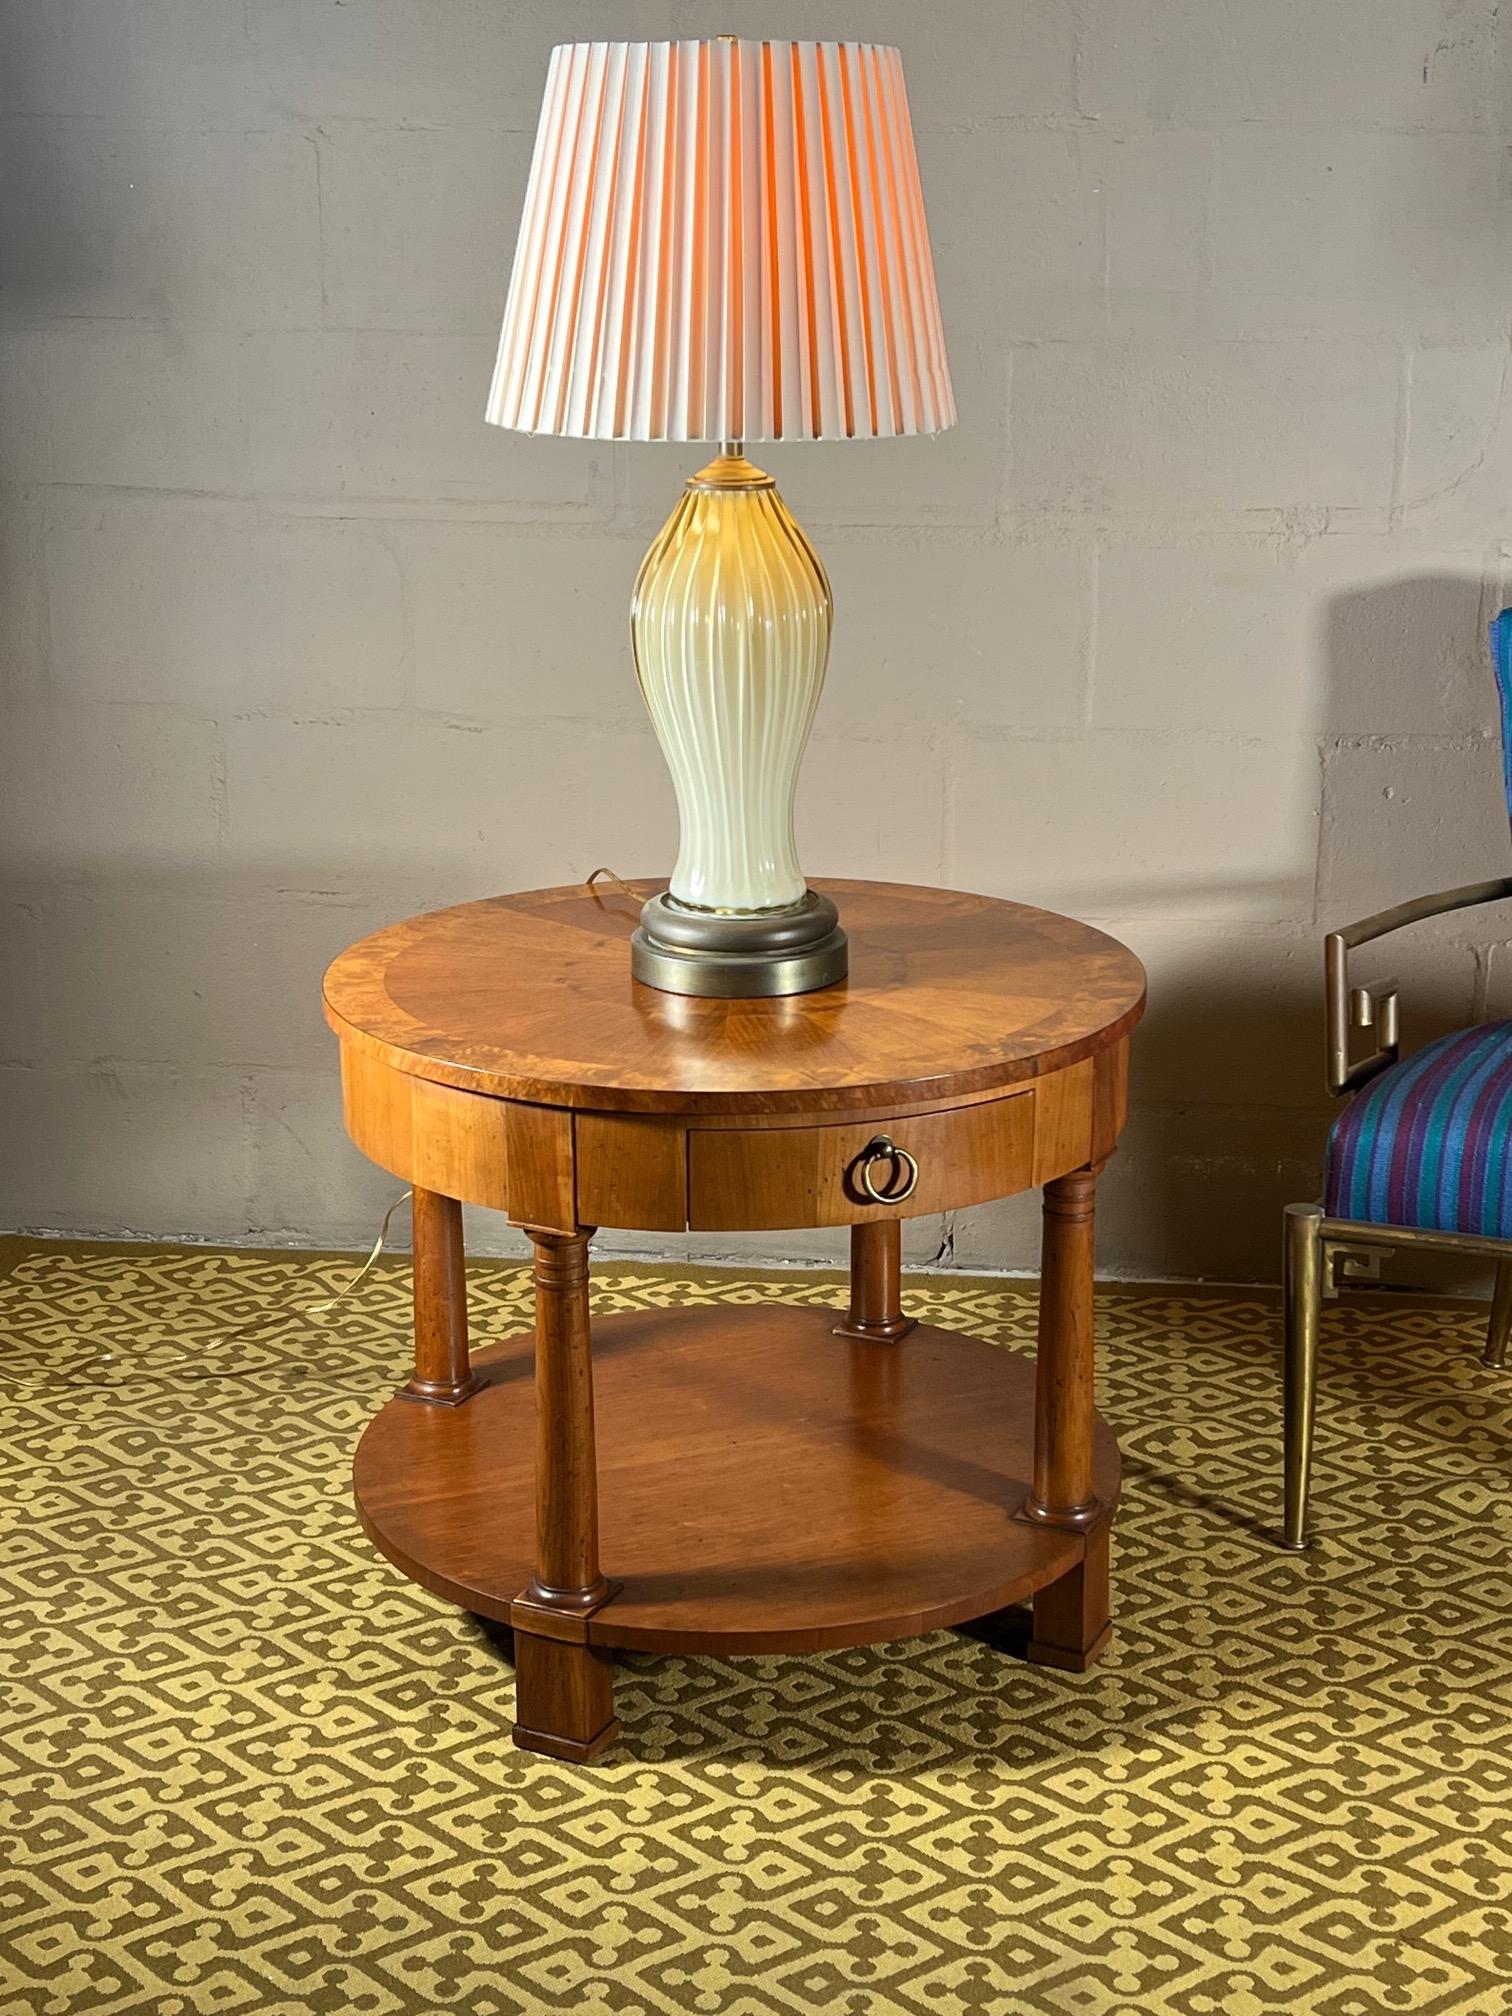 Empire Lamp Table By Baker With Walnut Sunburst Top